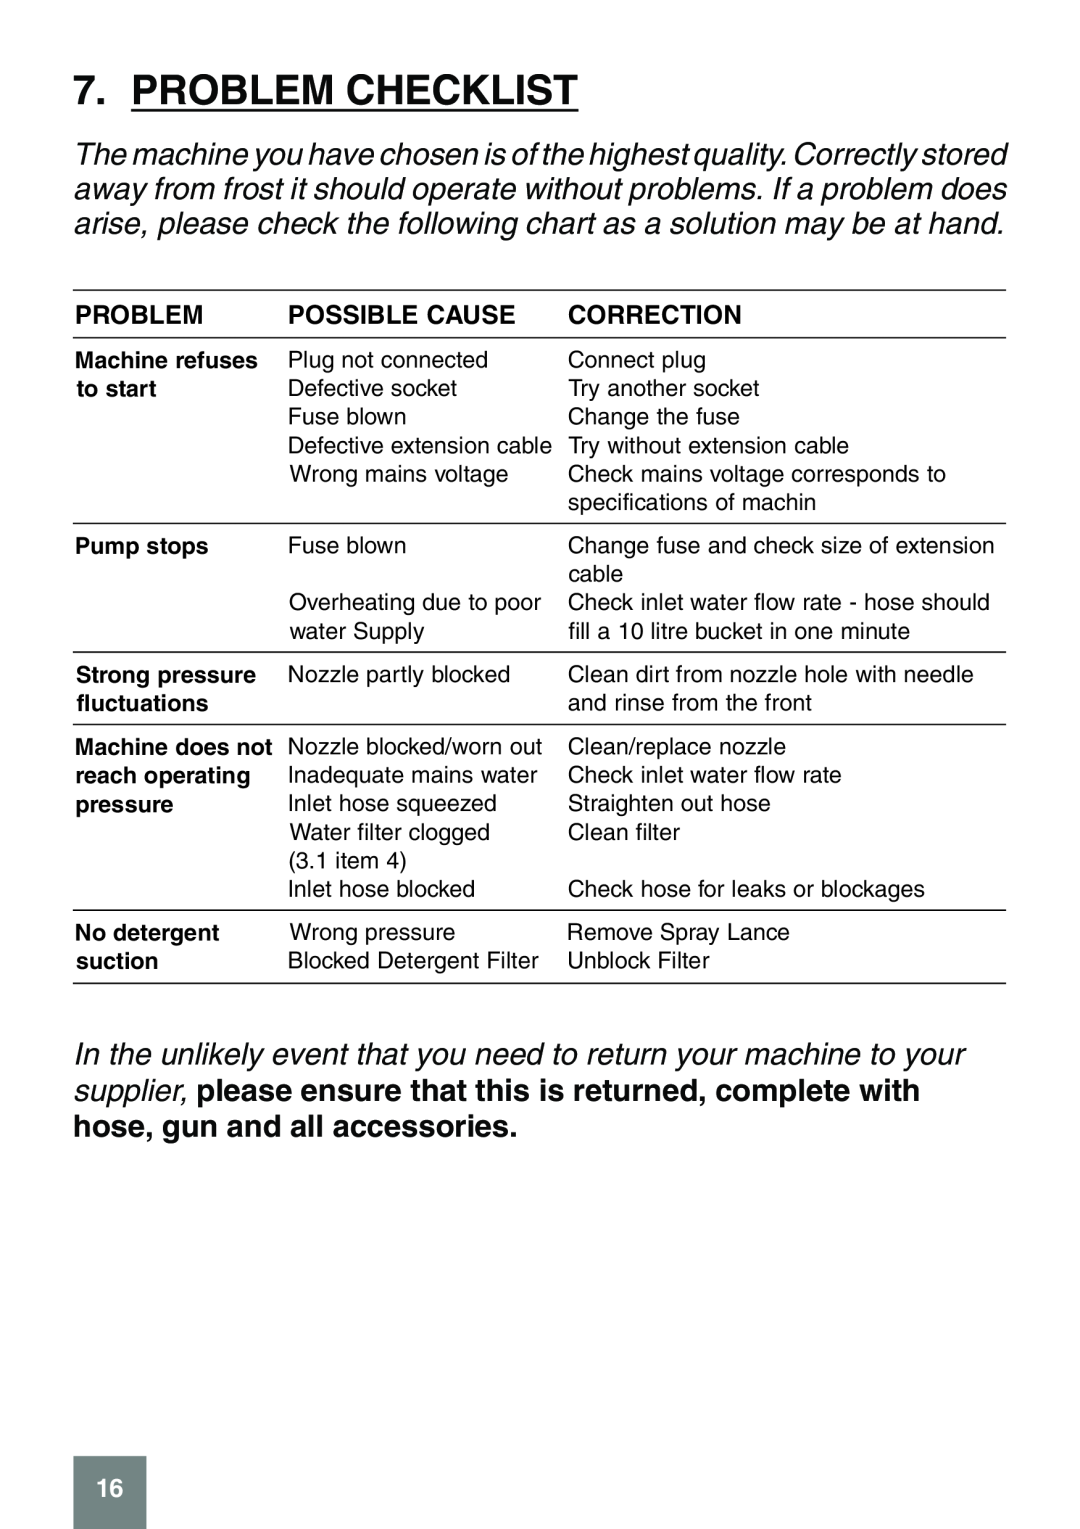 Karcher darcher manual Problem Checklist, Possible Cause, Correction, Machine refuses, to start, Pump stops, fluctuations 